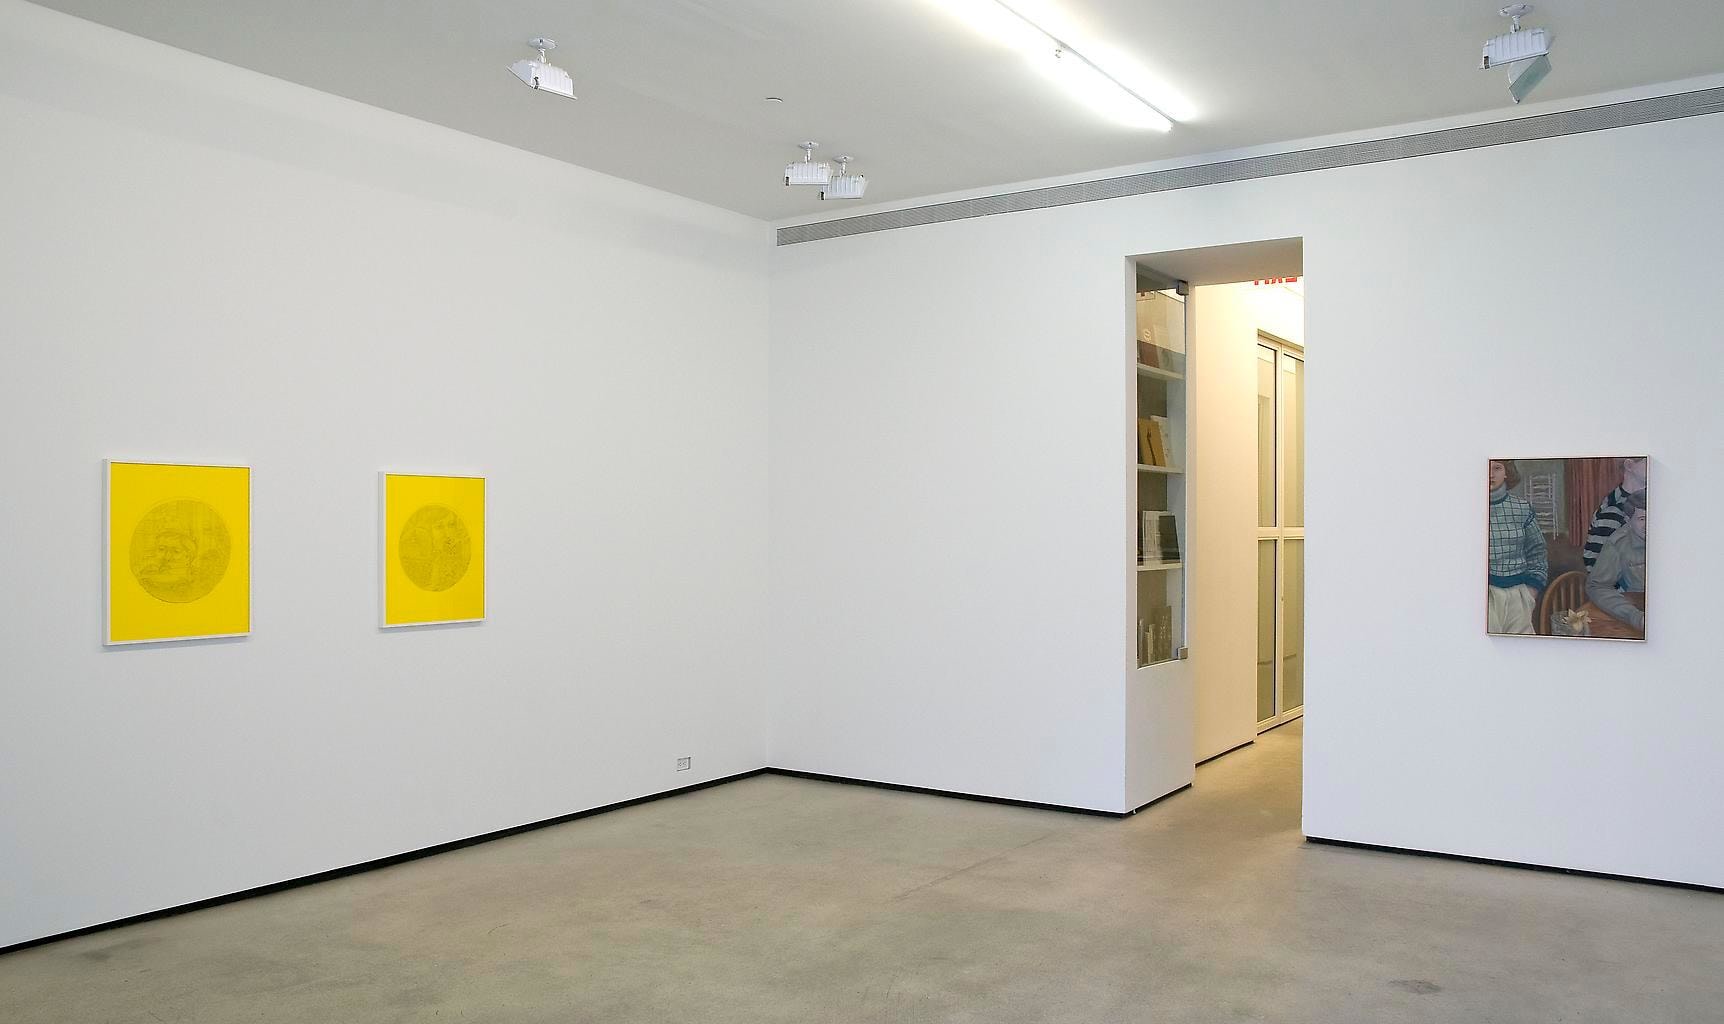  Installation view, Michael Cline, Arcadia, Marc Jancou, New York, March 18 - April 23, 2011